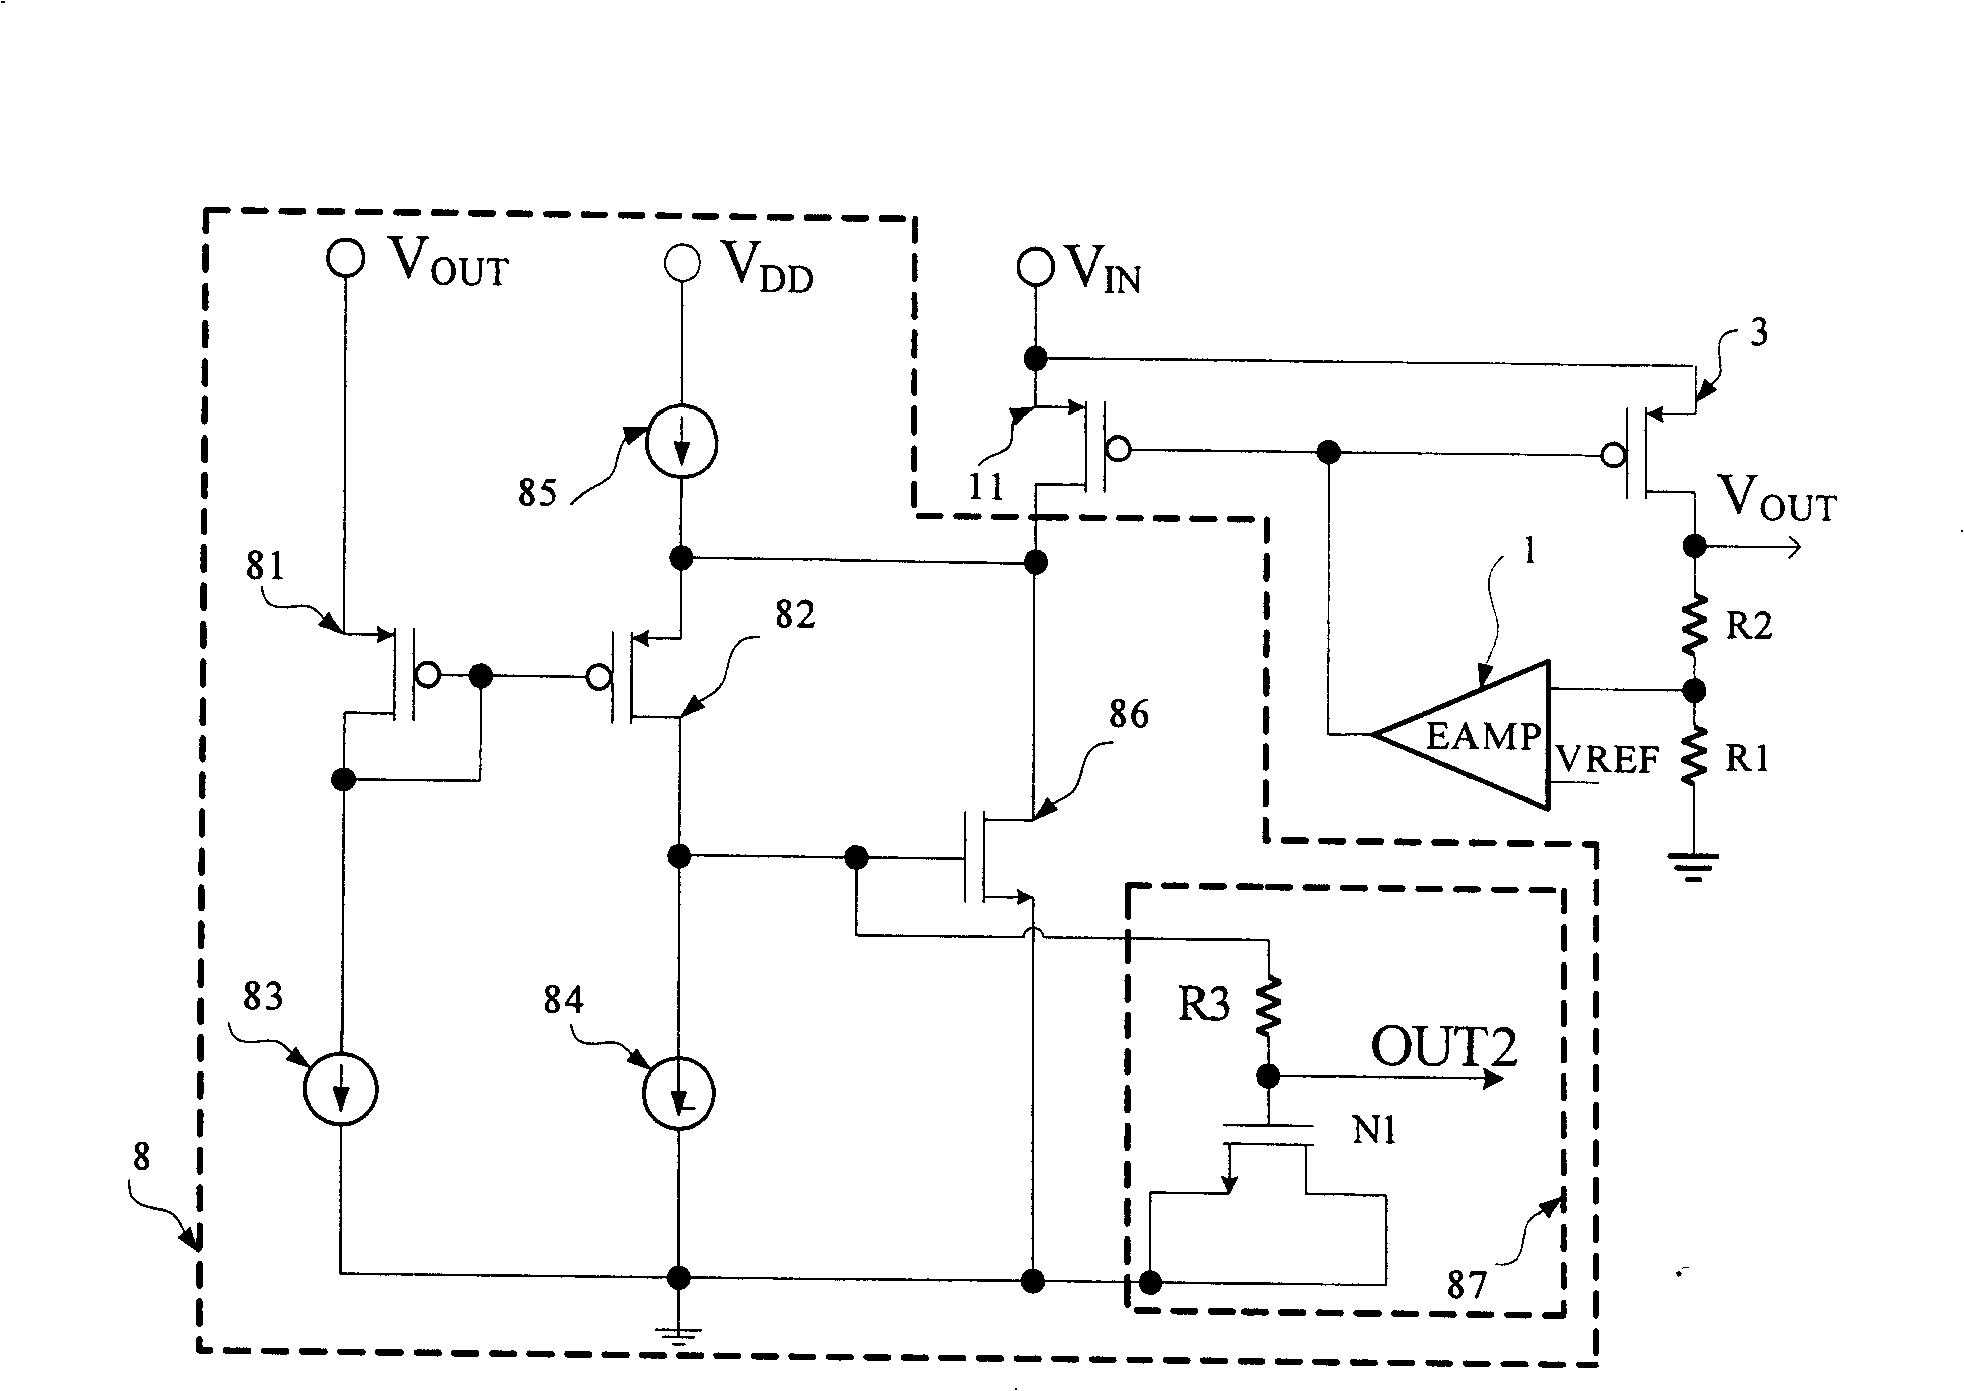 Double ring low differential voltage linear voltage stabilizer circuit